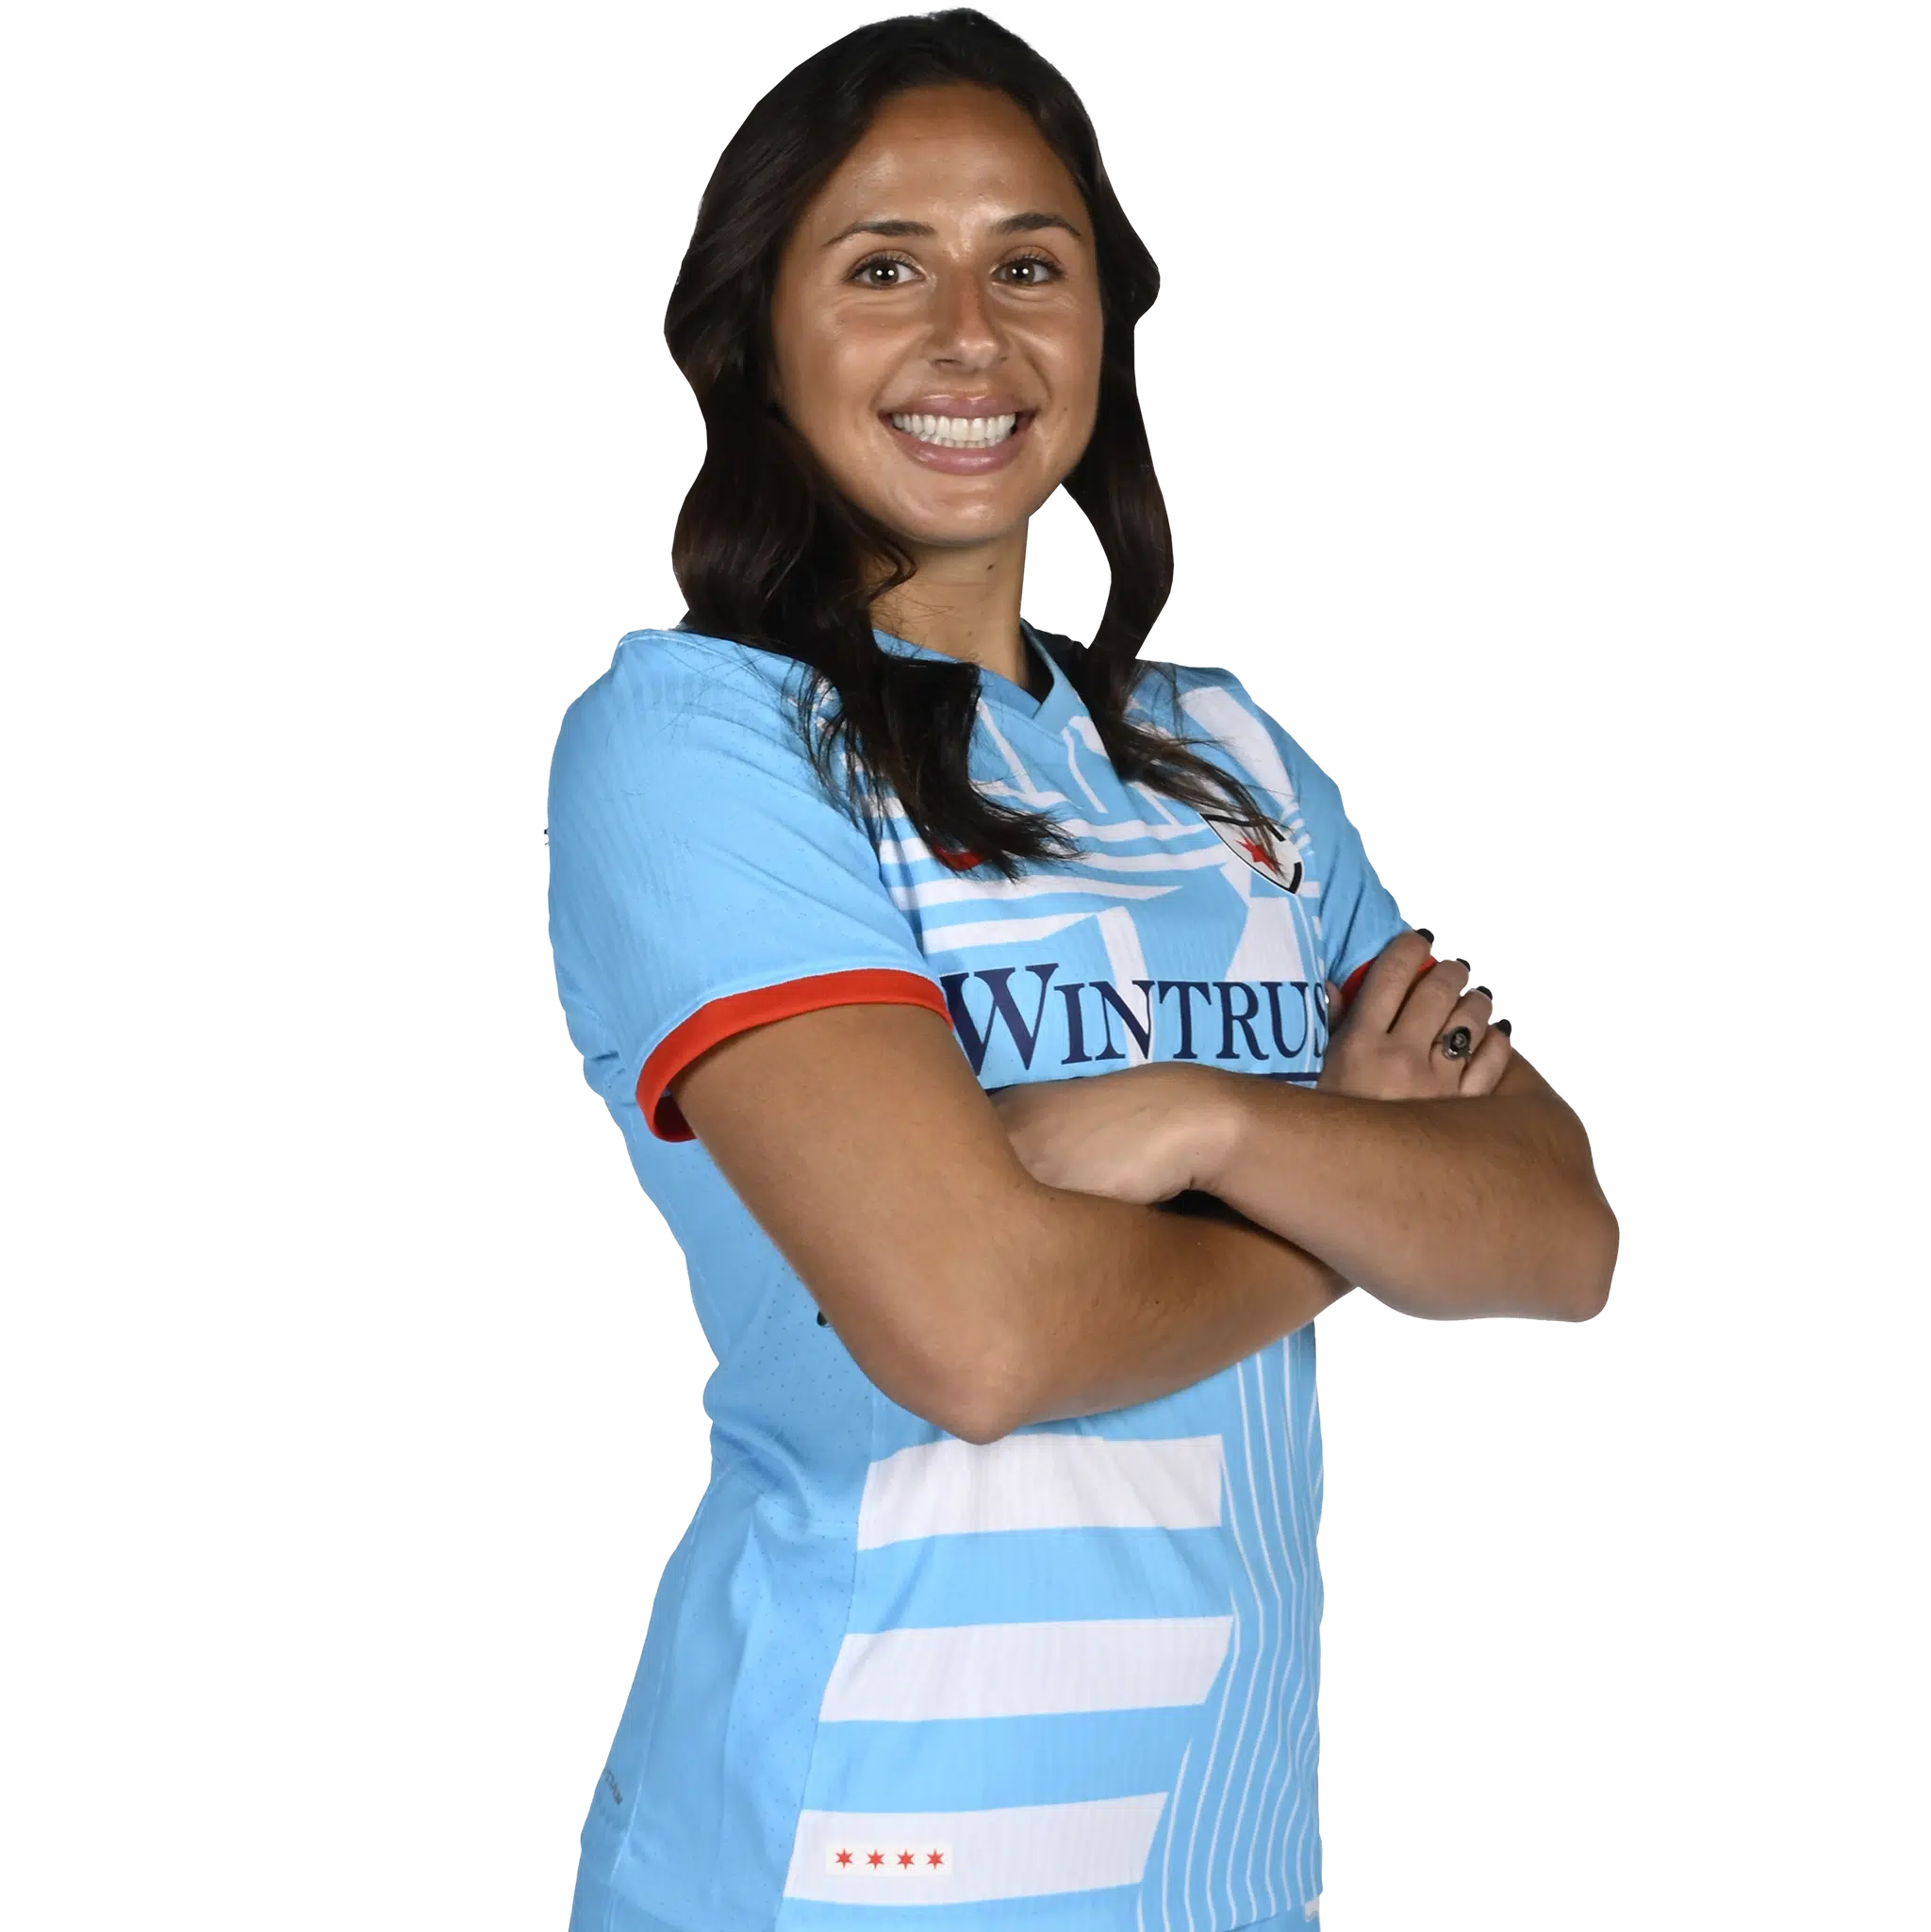 Chicago Red Stars featured player